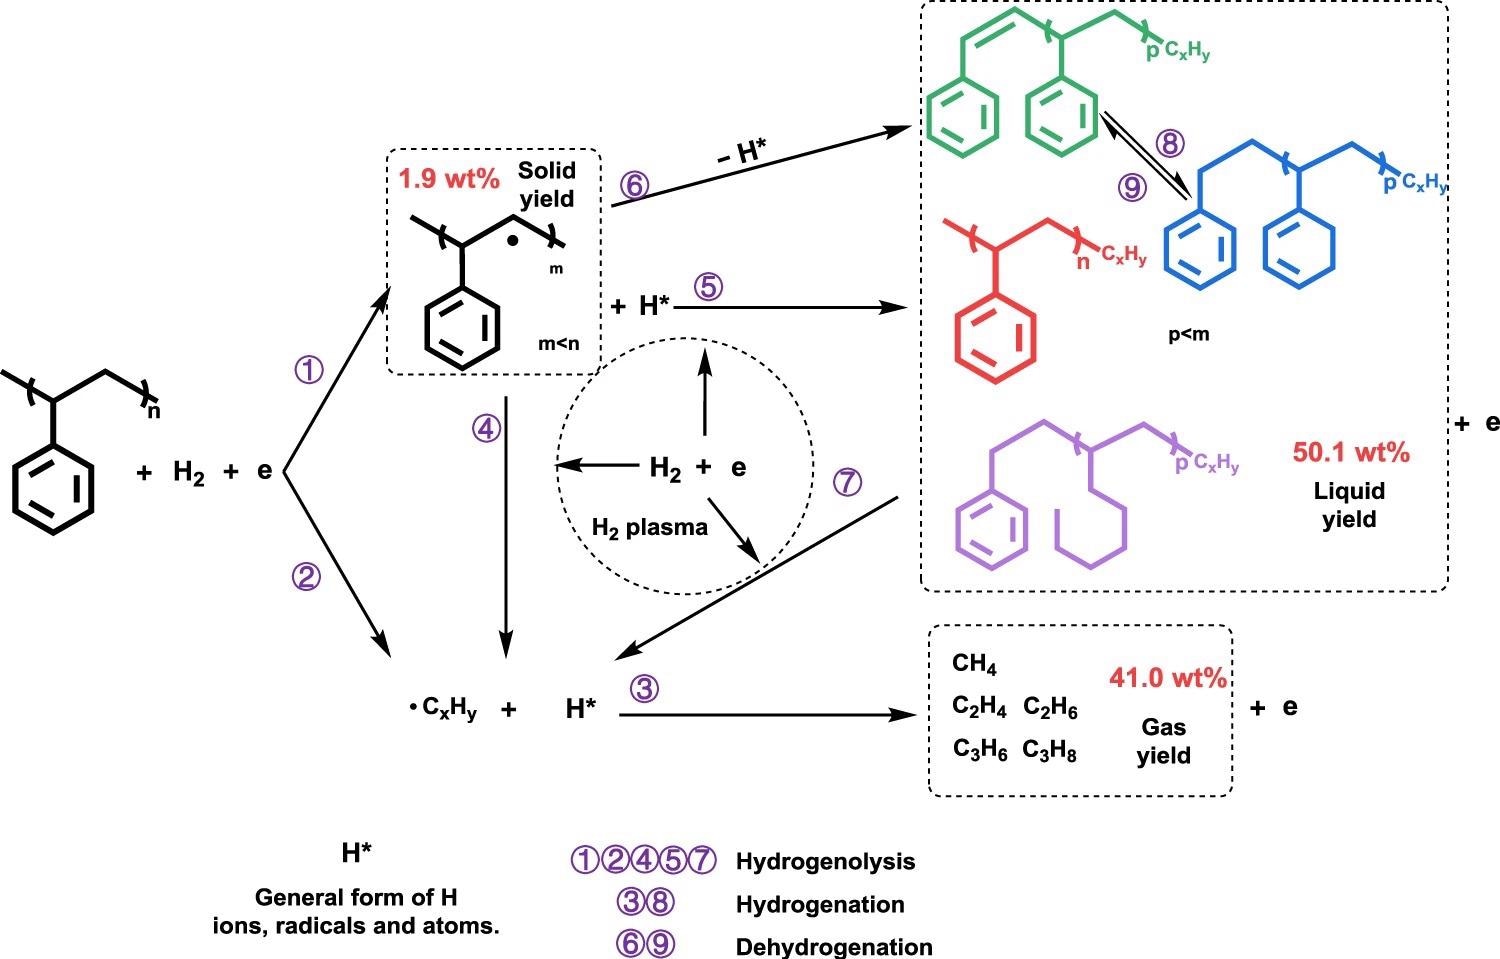 Illustrated reaction pathways for plasma-assisted PS hydrogenolysis.